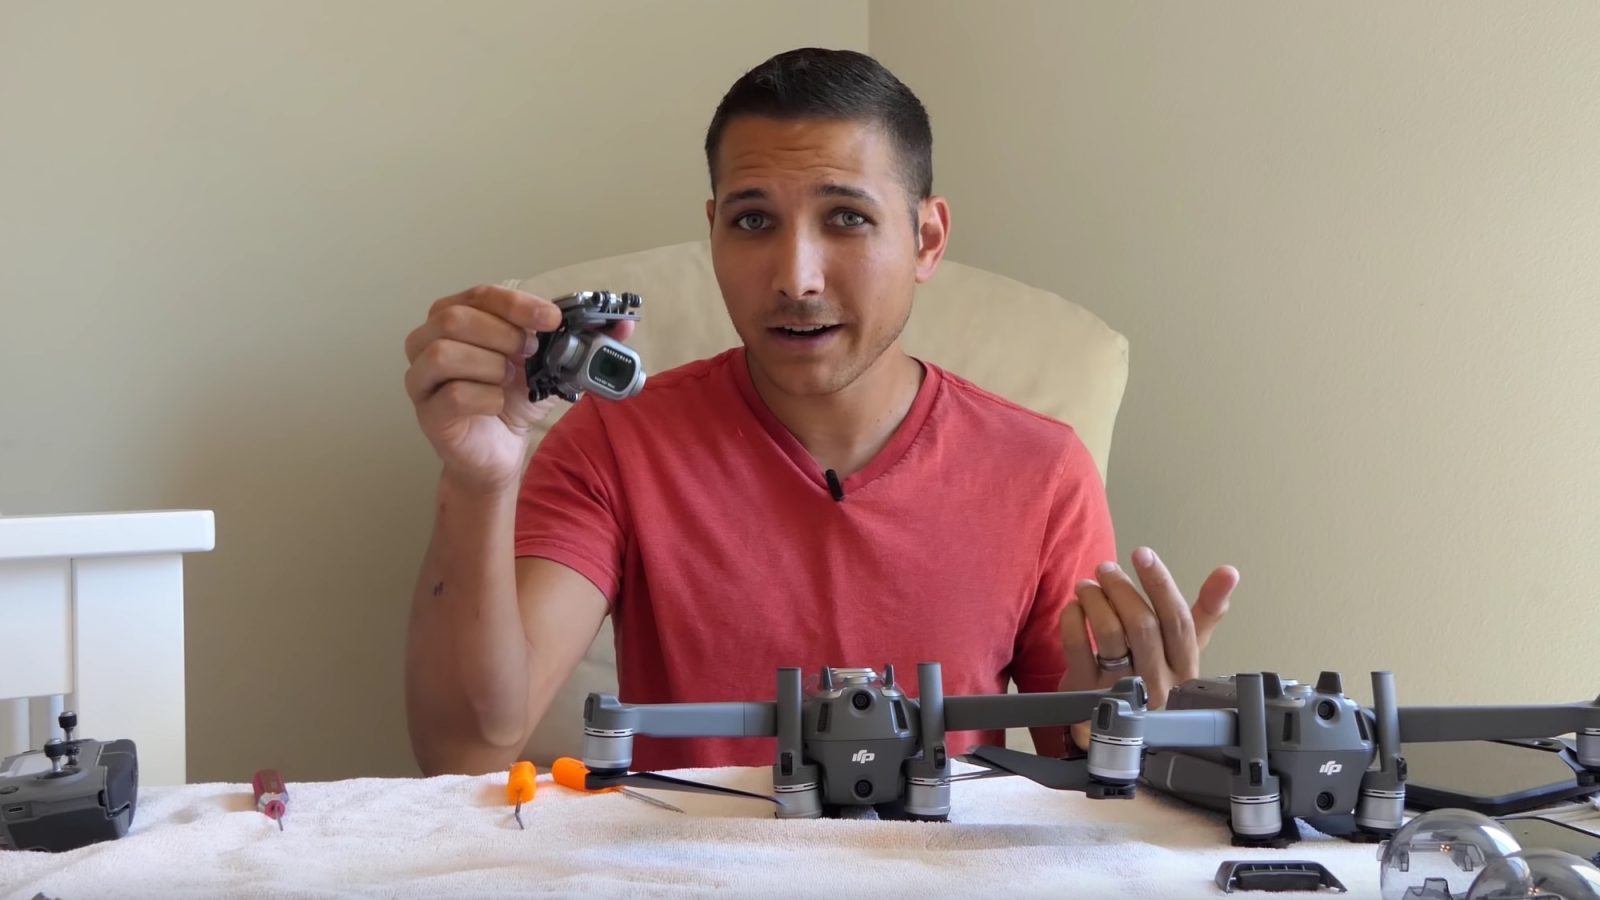 DIY camera swap for the DJI Magic Zoom and Pro drones [video]